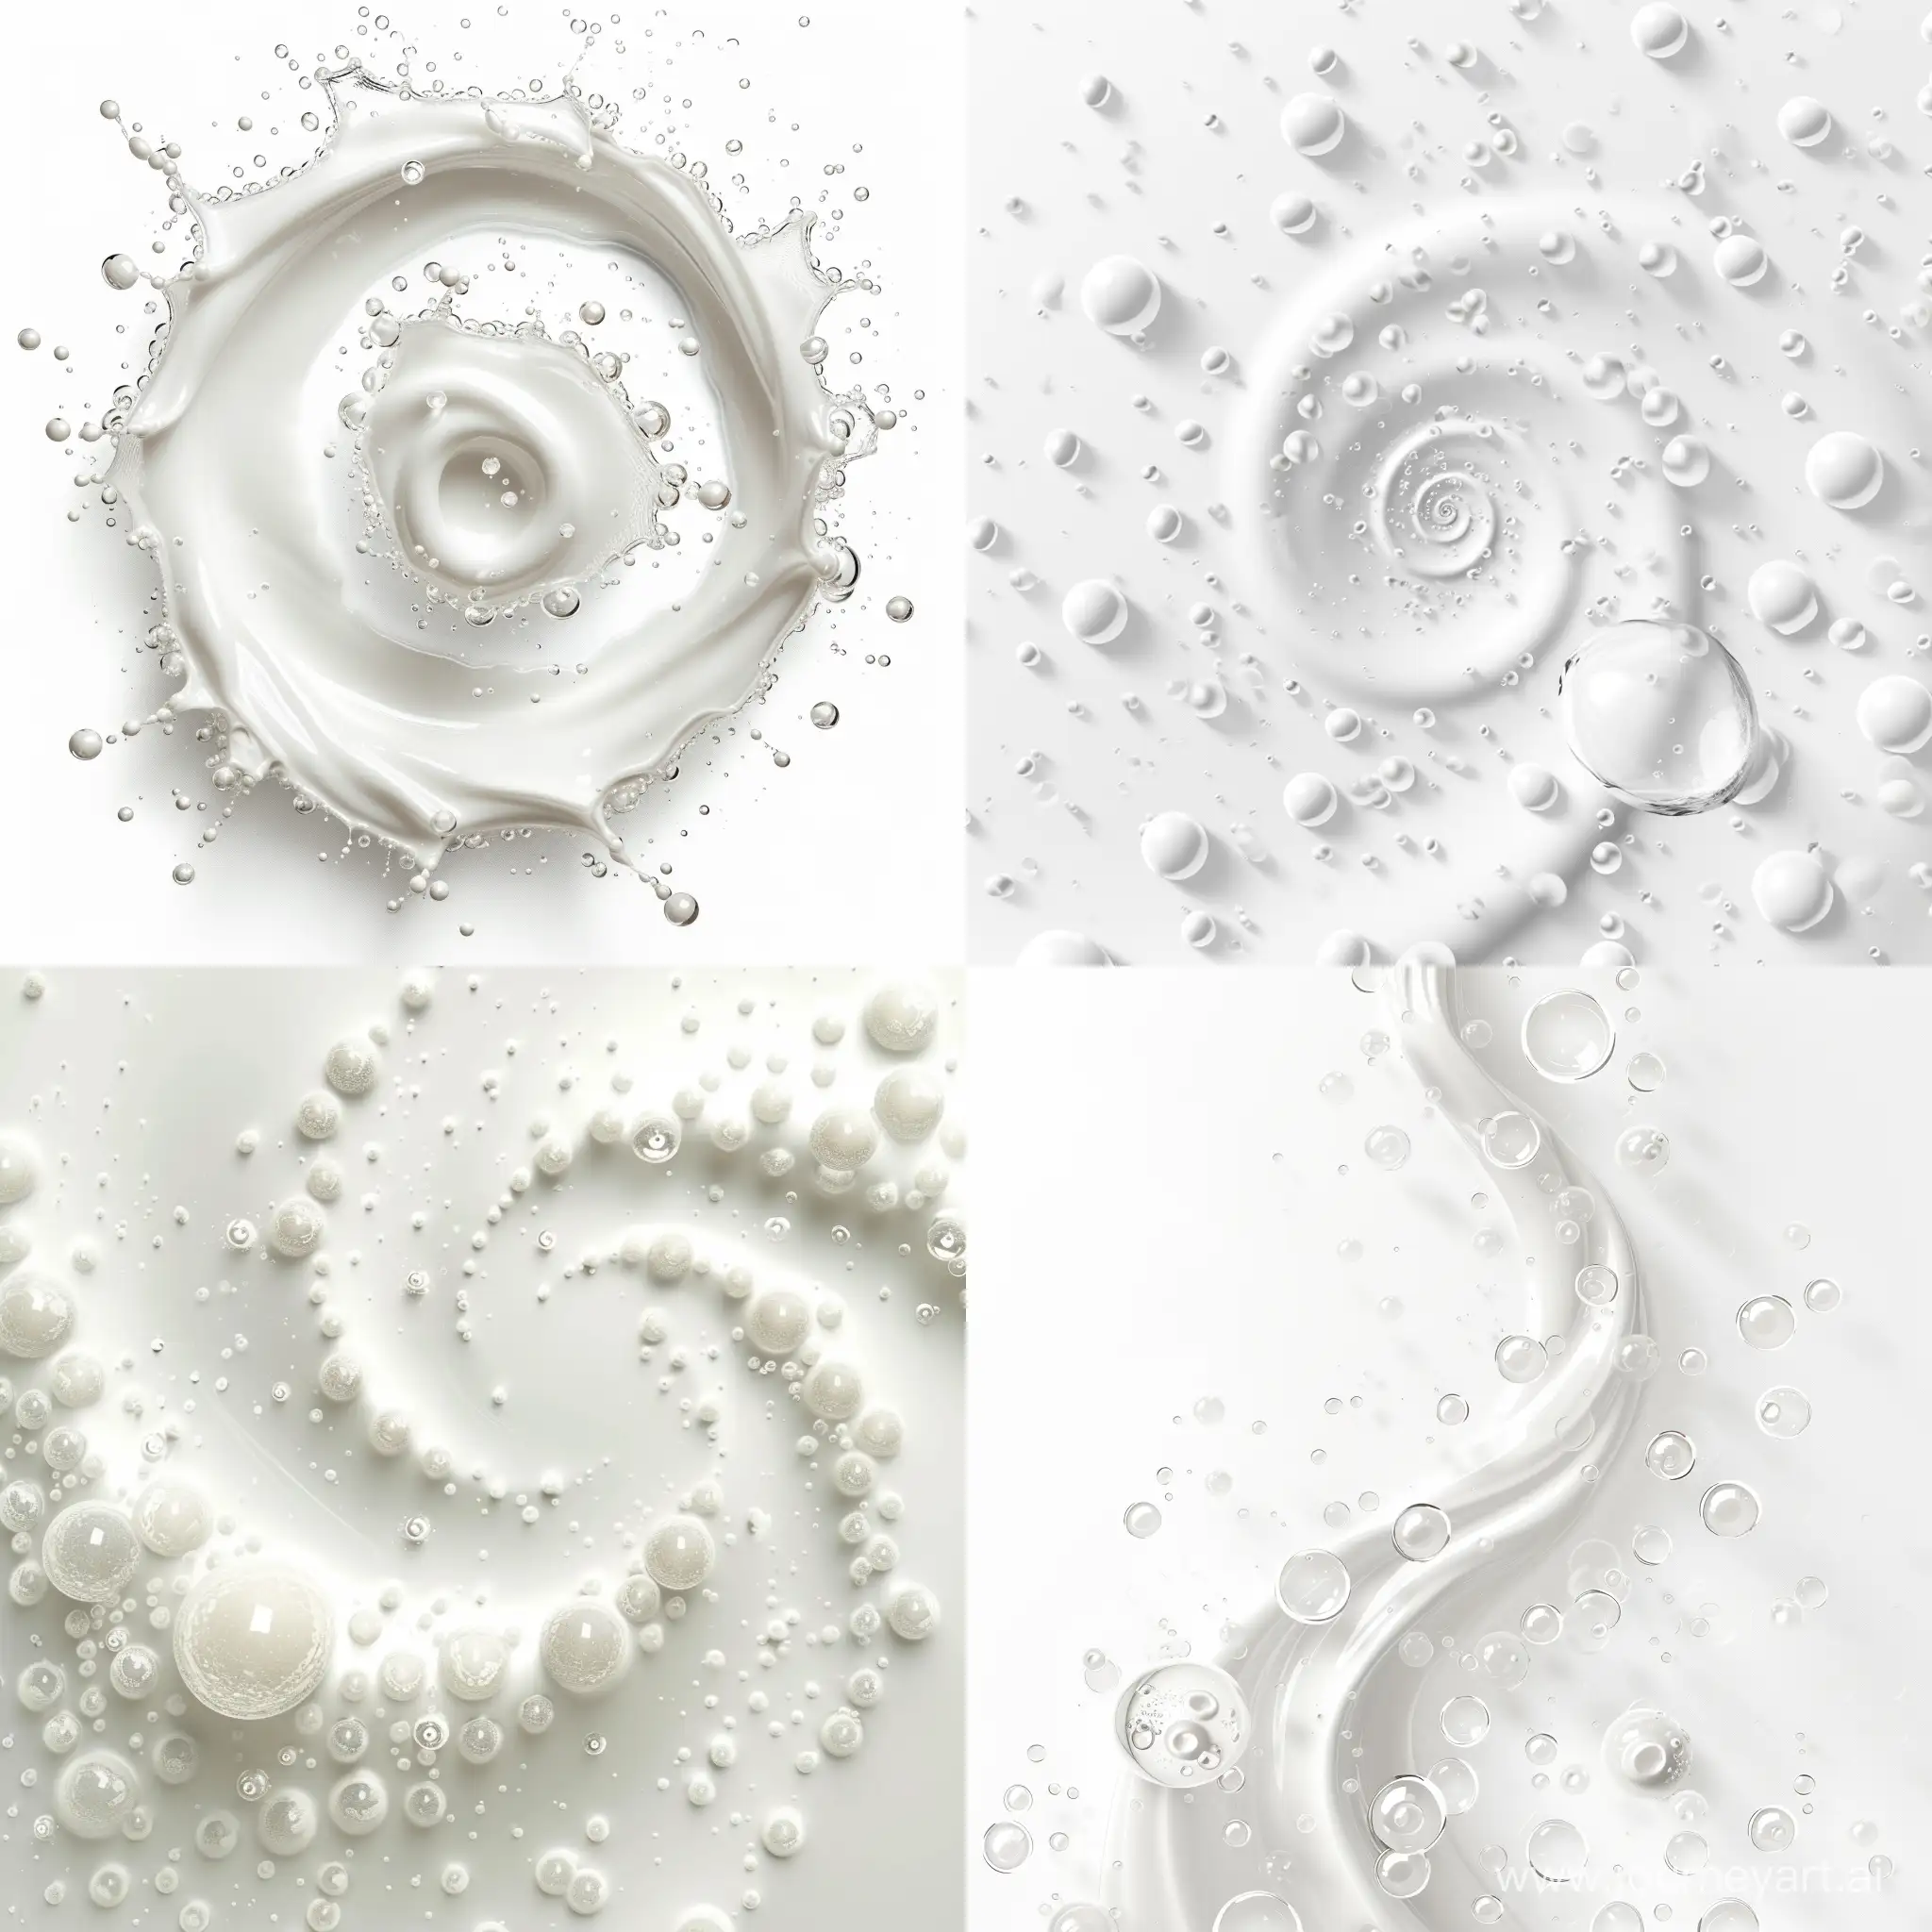 swirling white bubbles on a white background
